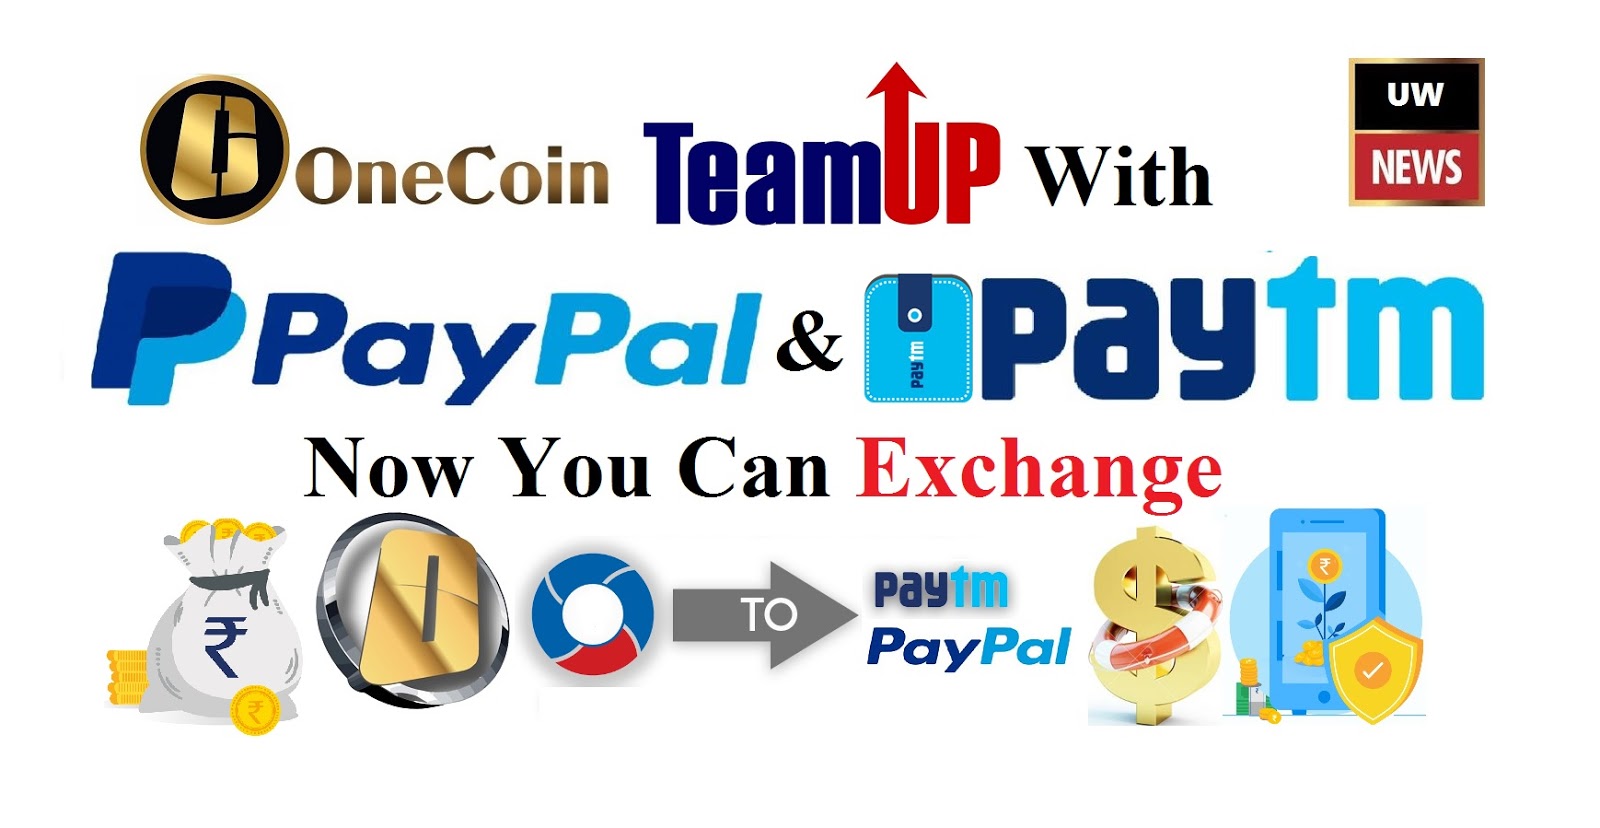 OneCoin Teamed Up With PayPal and Paytm Now You Can ...